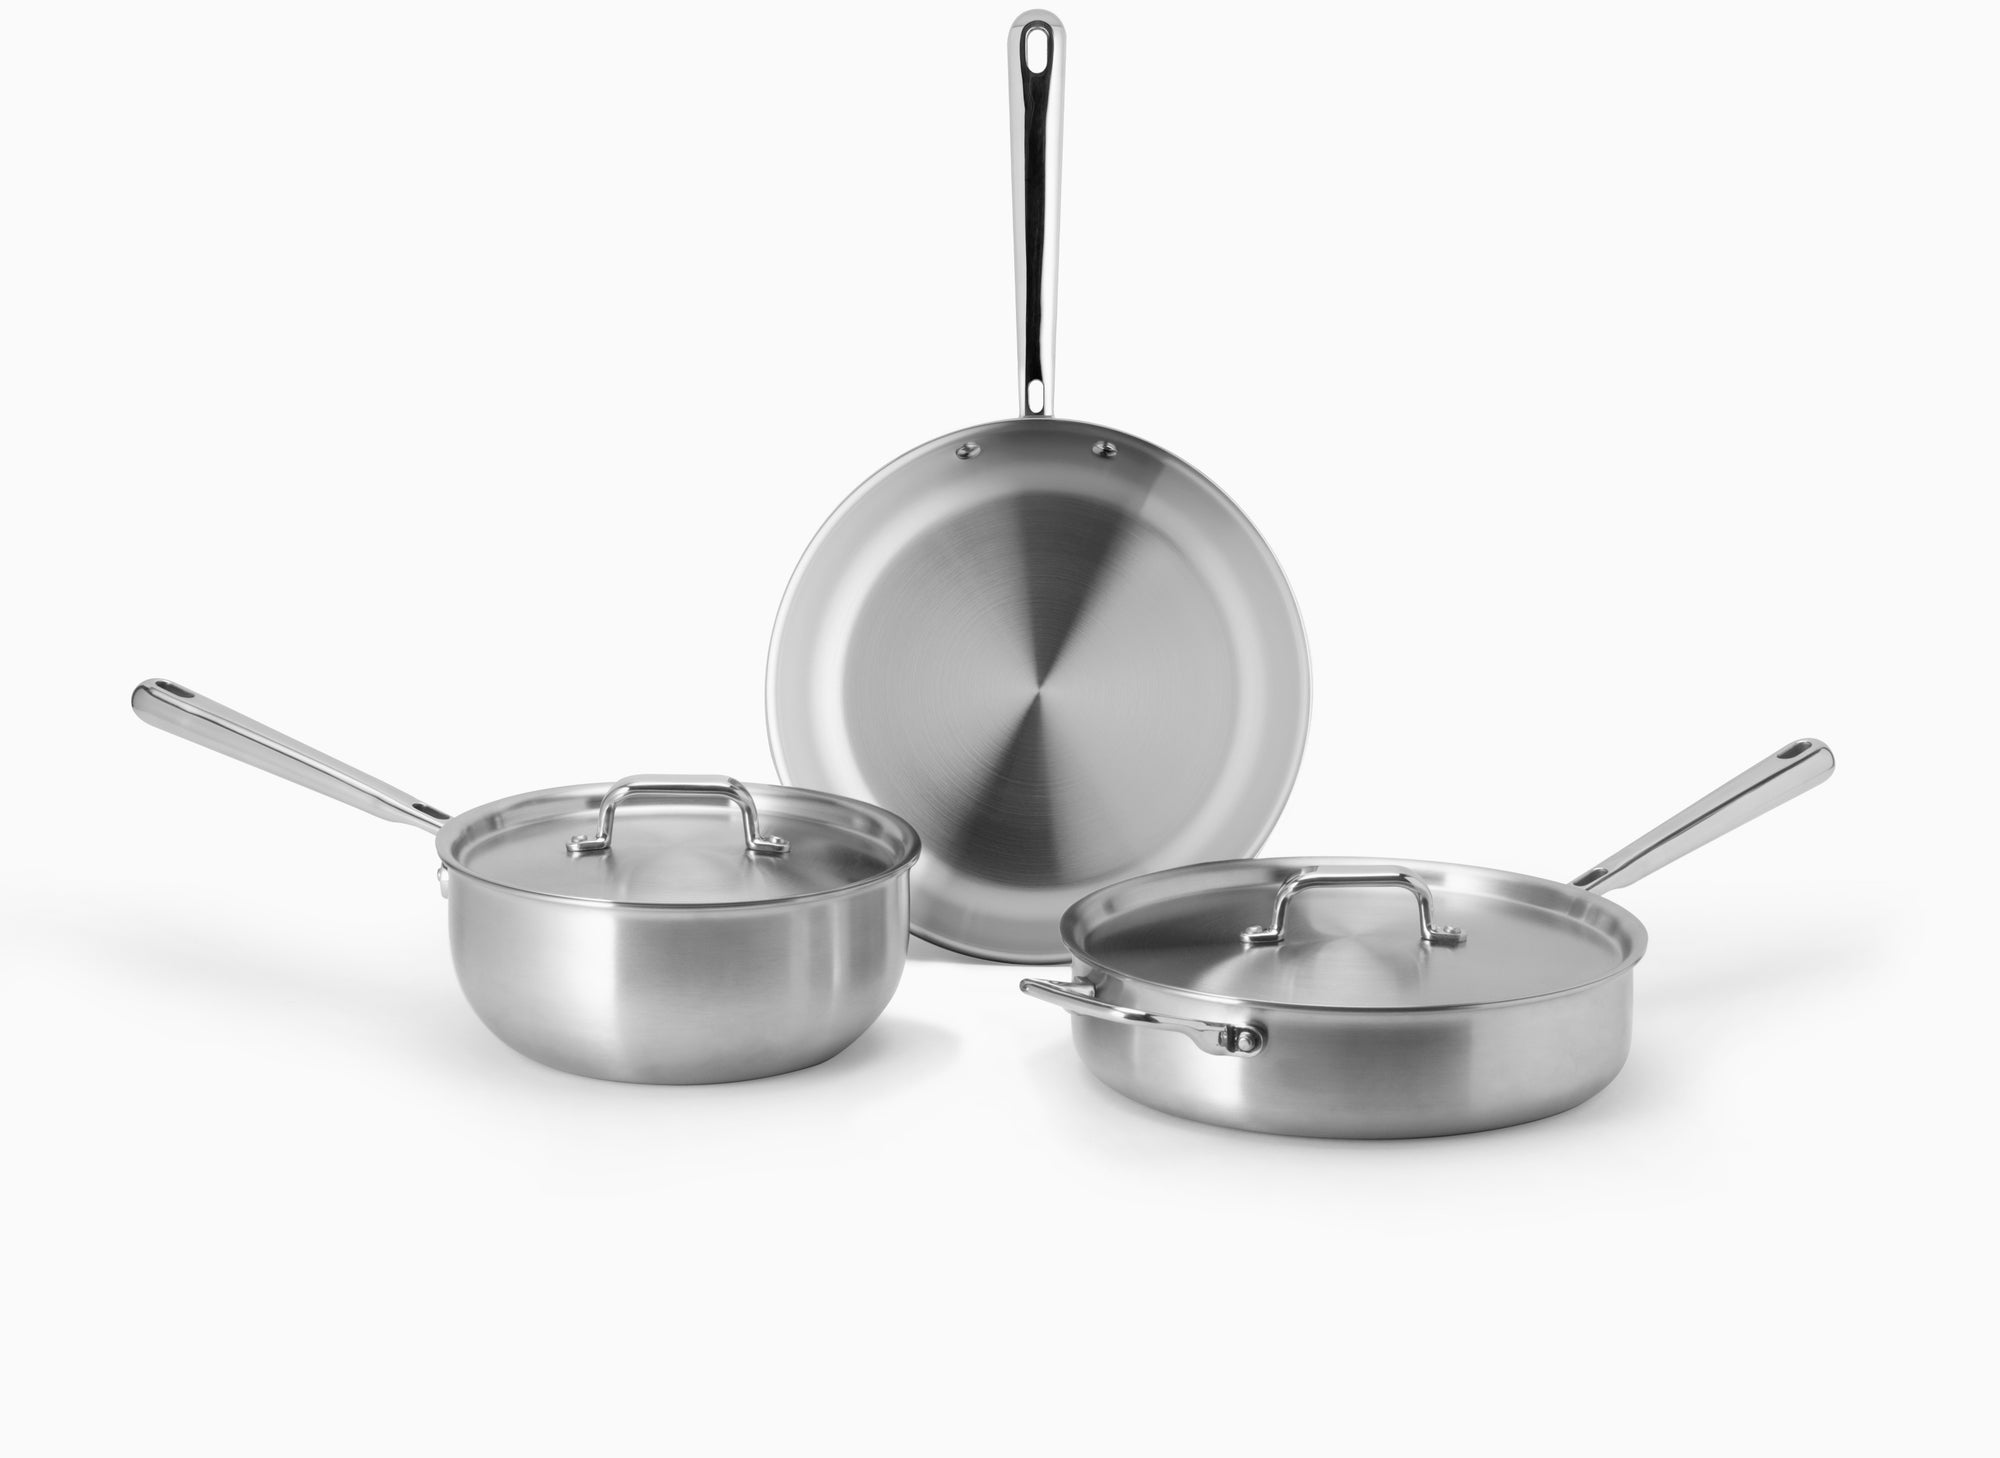 Tramontina Cookware Set: Stainless Steel, Tri Ply Base, Everyday Use, Non  Stick, Dishwasher Safe, Induction Compatible. From Hmkjhome, $55